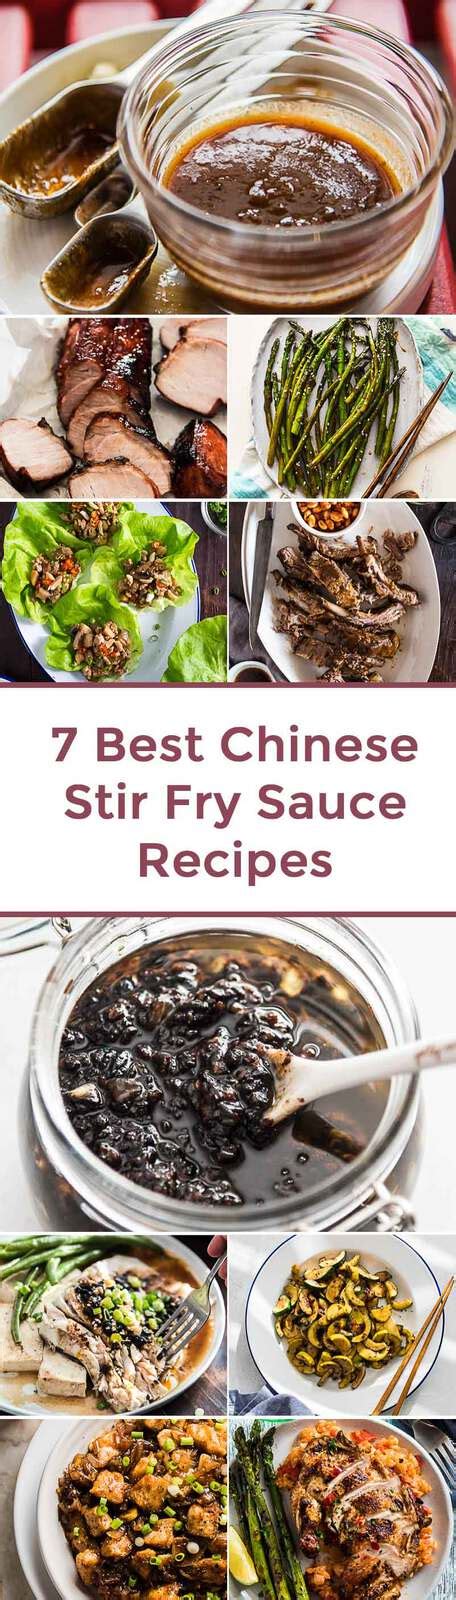 You want about 1/3 cup of sauce for every pound. 7 Best Chinese Stir Fry Sauce Recipes | Omnivore's Cookbook